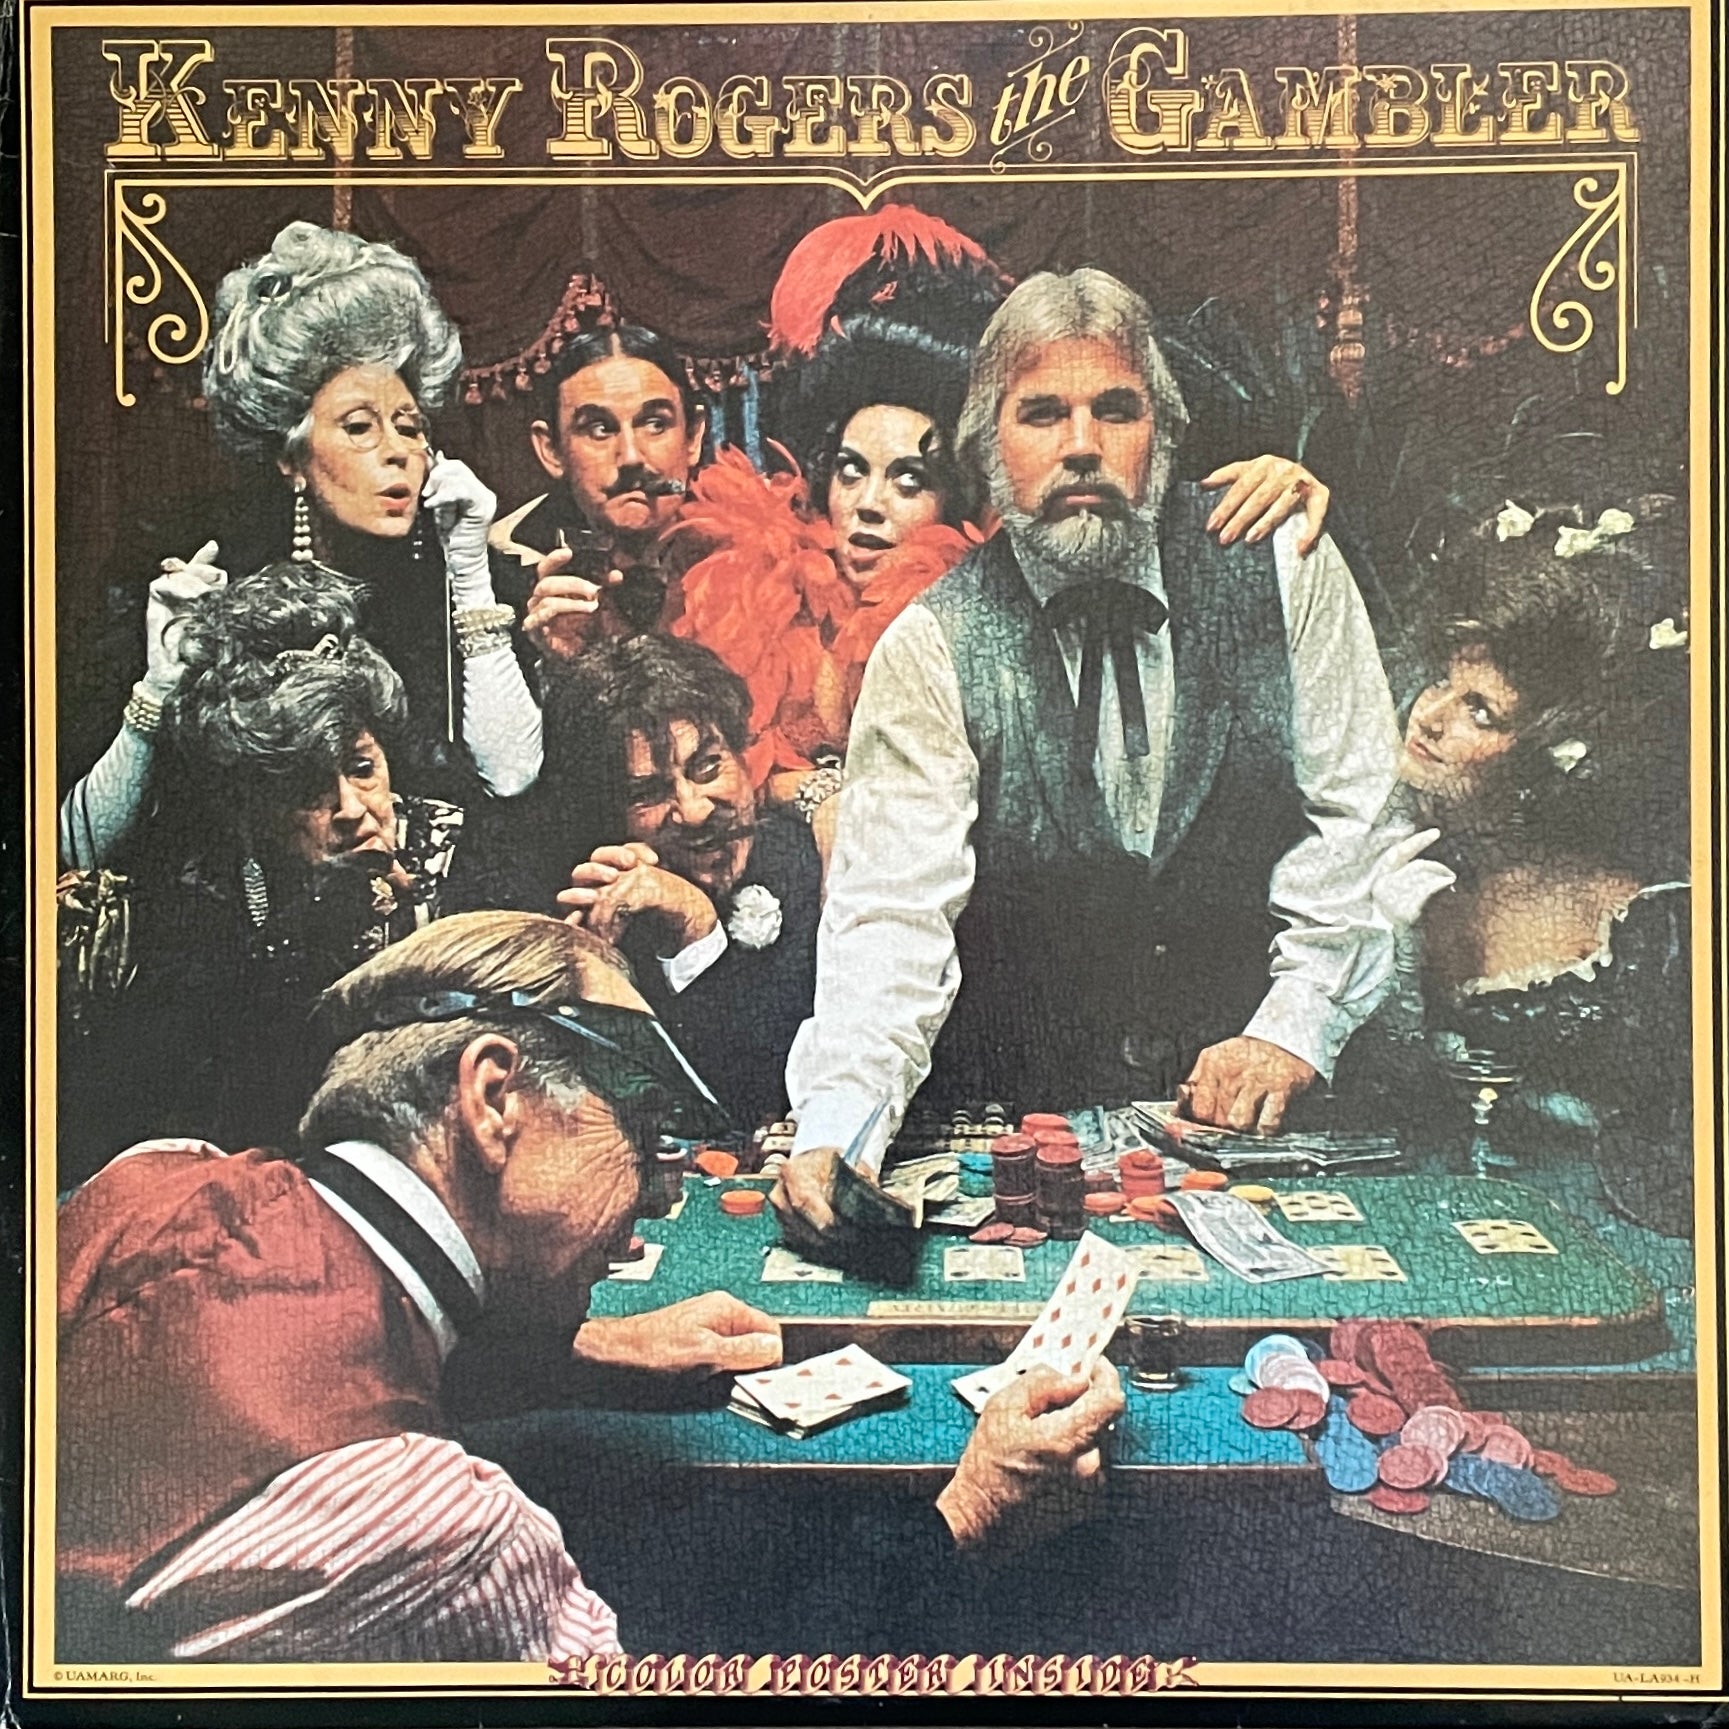 Kenny Rogers – The Gambler – Garfield Records